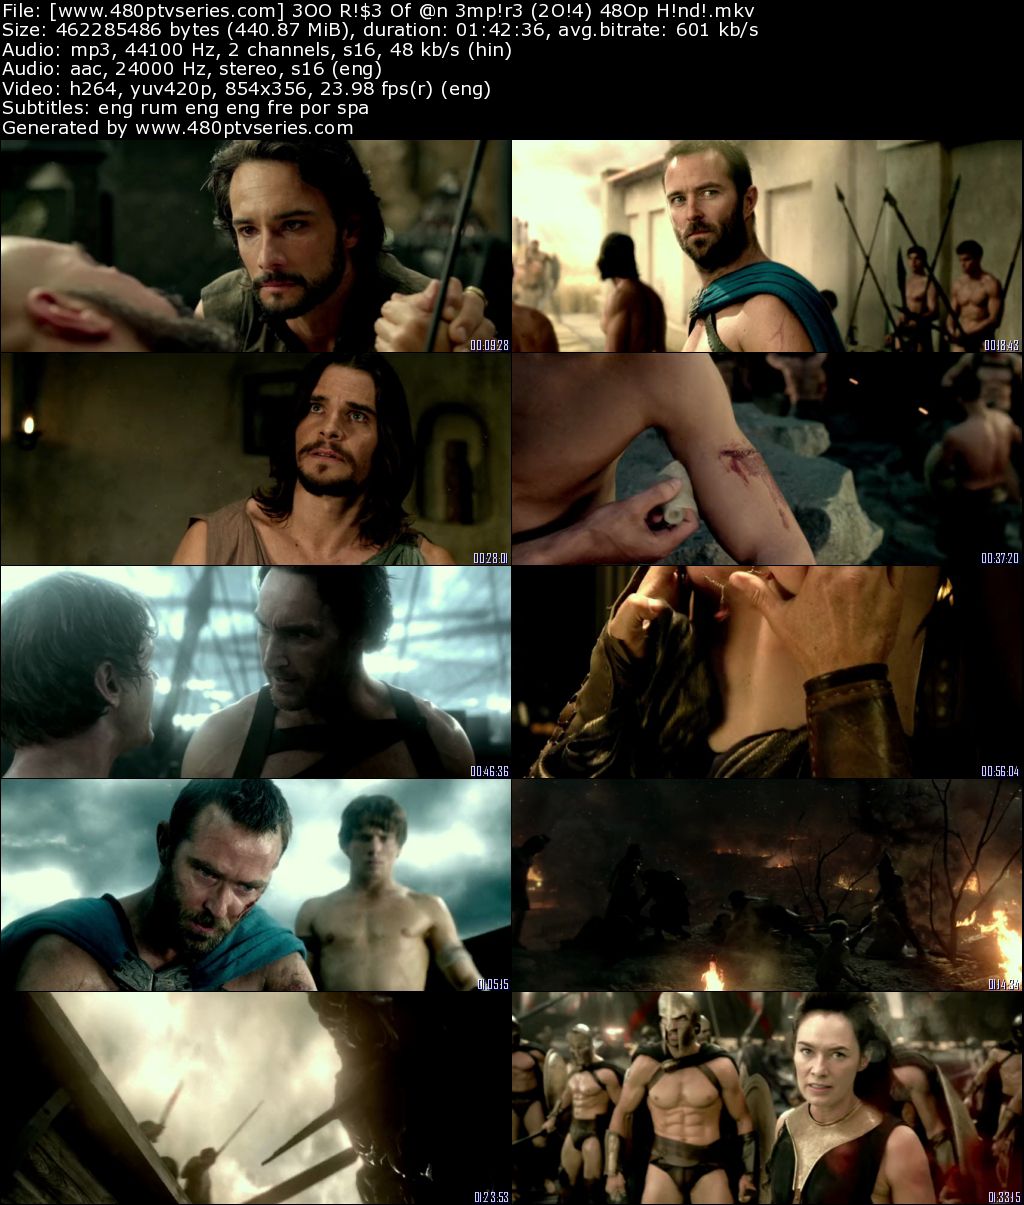 Rating: 6.2/10 Movie name: 300 Rise of an Empire Genres: Action Fantasy War...